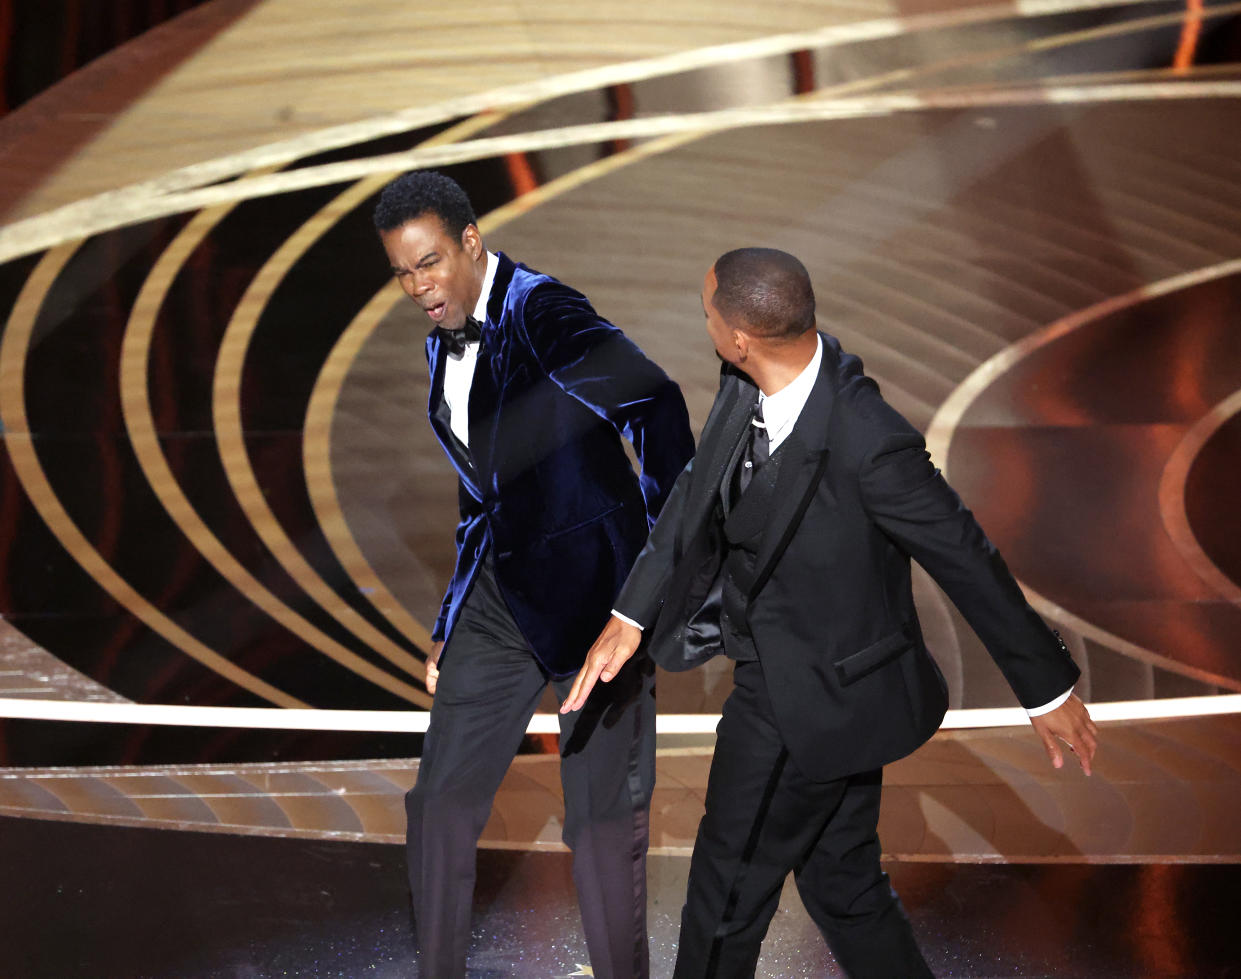 HOLLYWOOD, CA - March 27, 2022.    Chris Rock and Will Smith onstage during the show  at the 94th Academy Awards at the Dolby Theatre at Ovation Hollywood on Sunday, March 27, 2022.  (Myung Chun / Los Angeles Times via Getty Images)